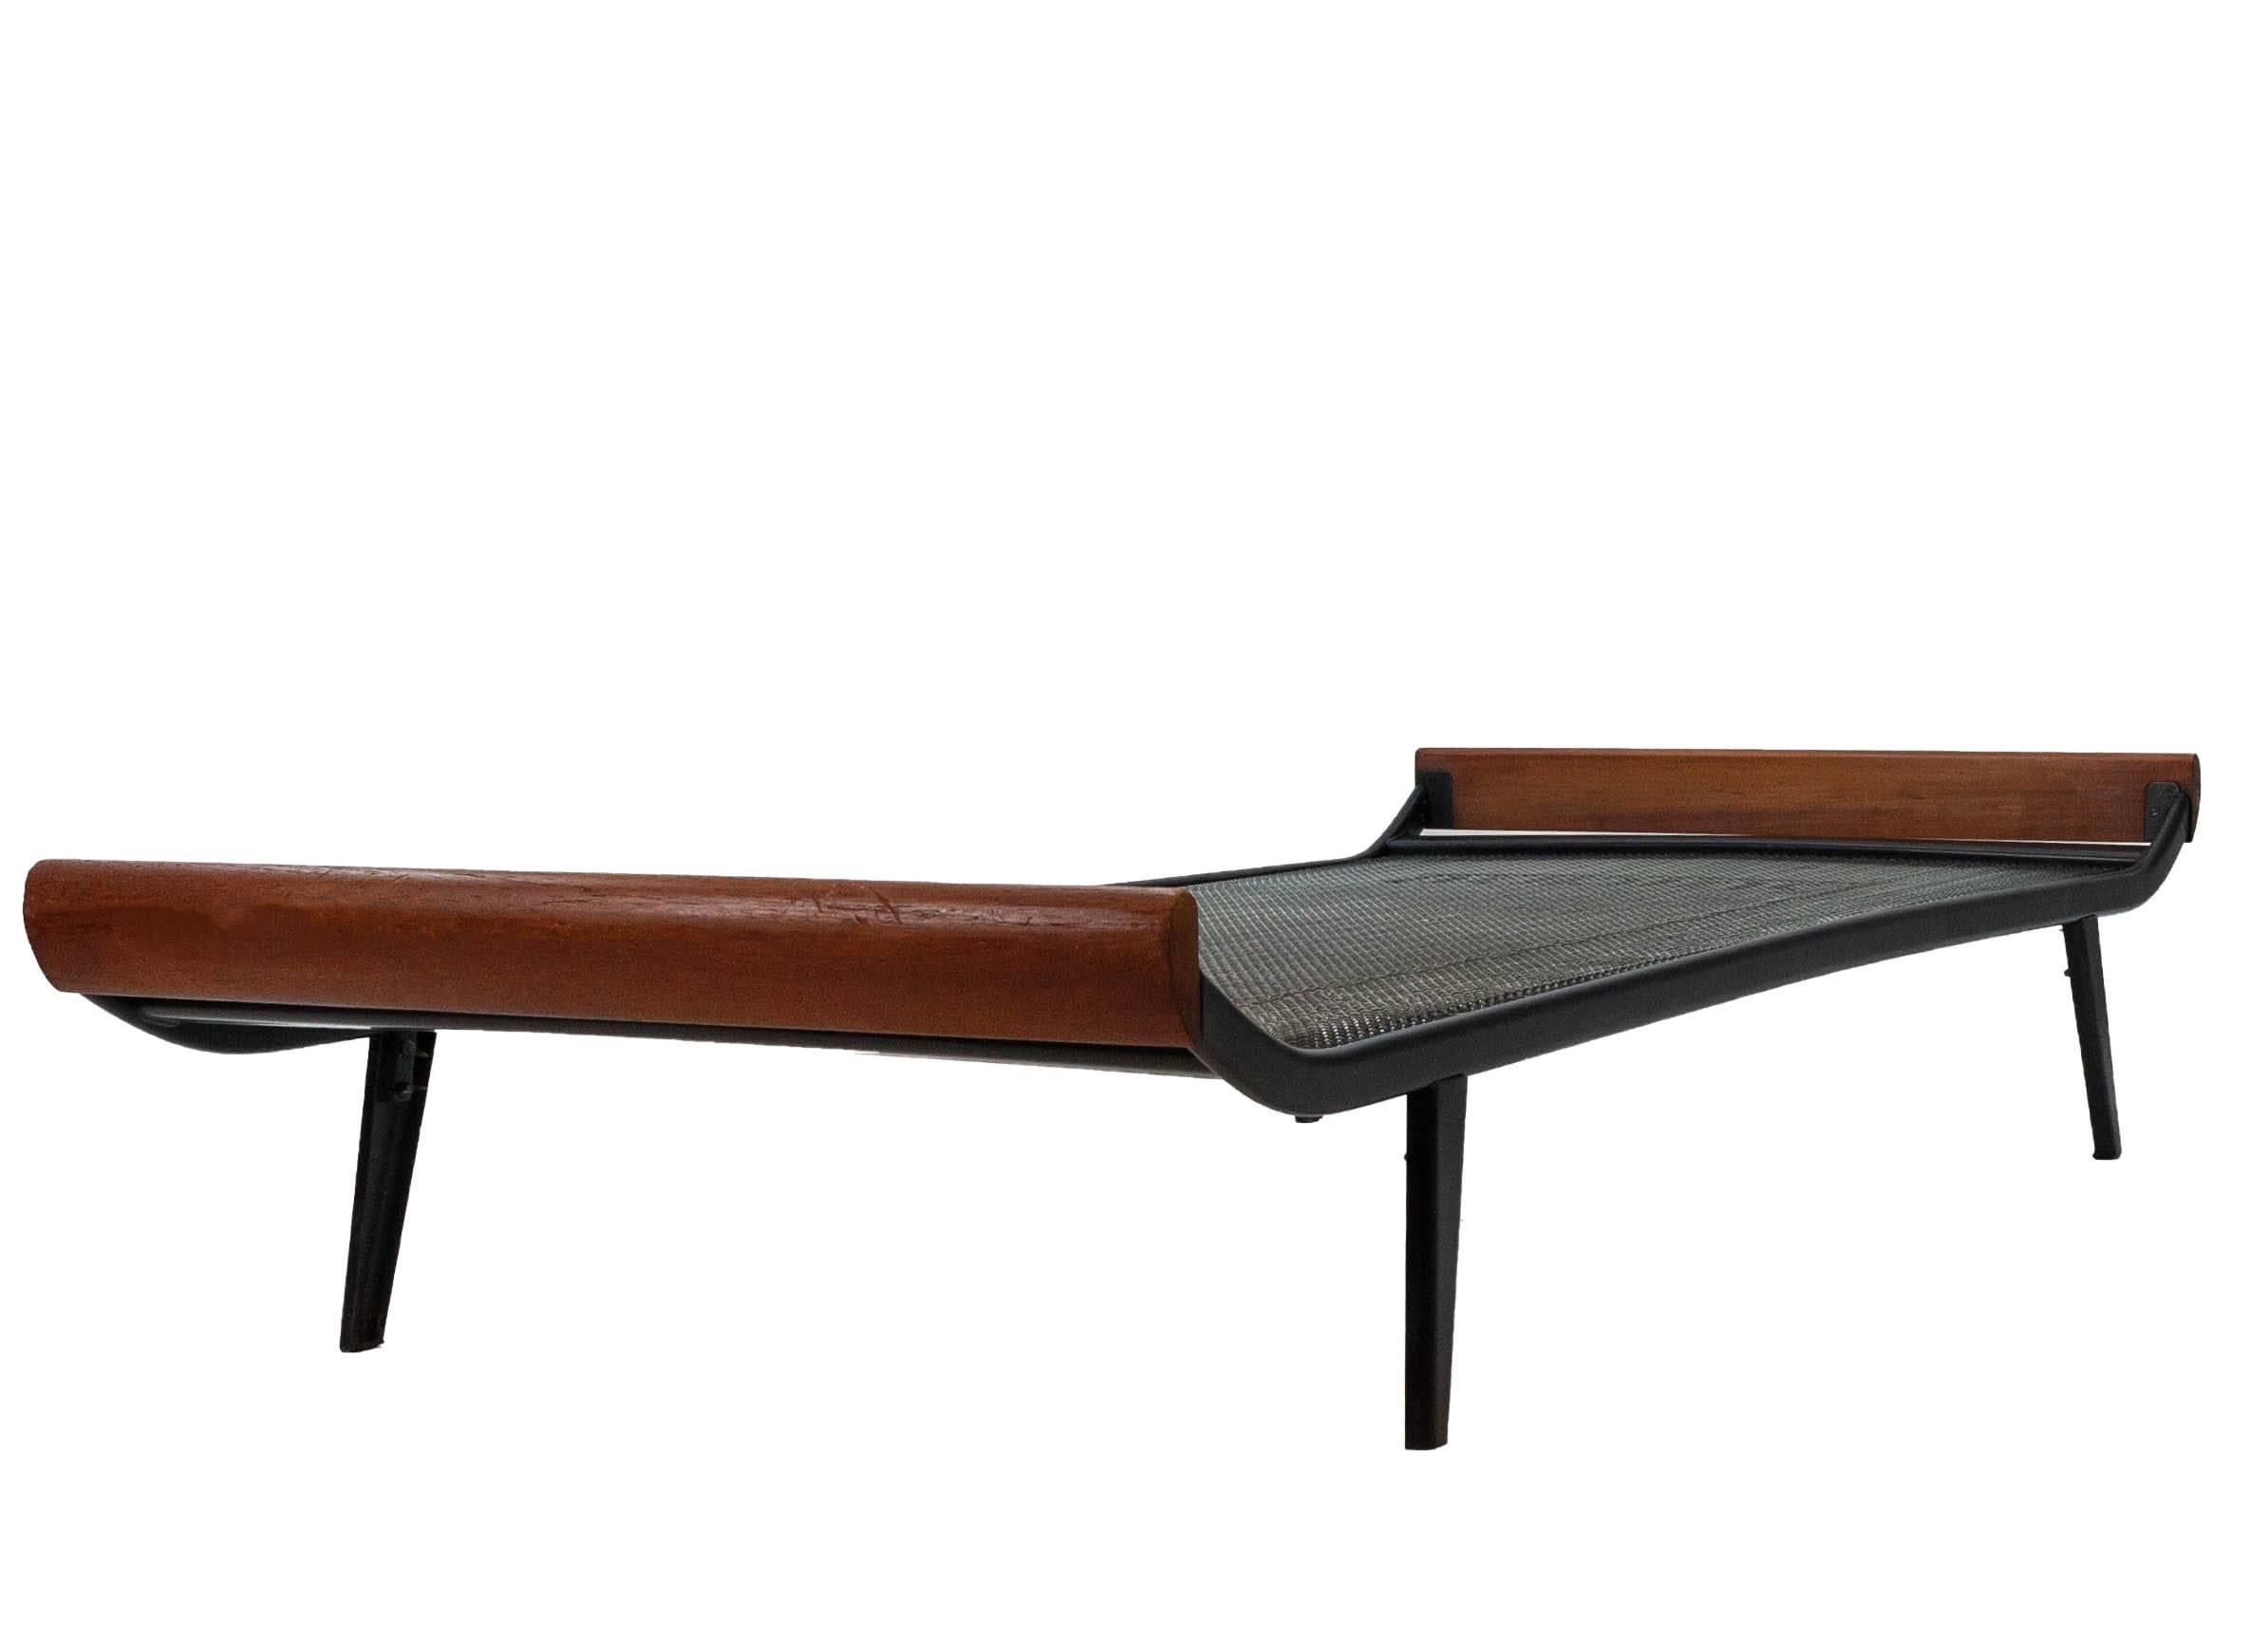 20th Century Cleopatra Daybed by Cordemeijer for Auping, Teak on Black